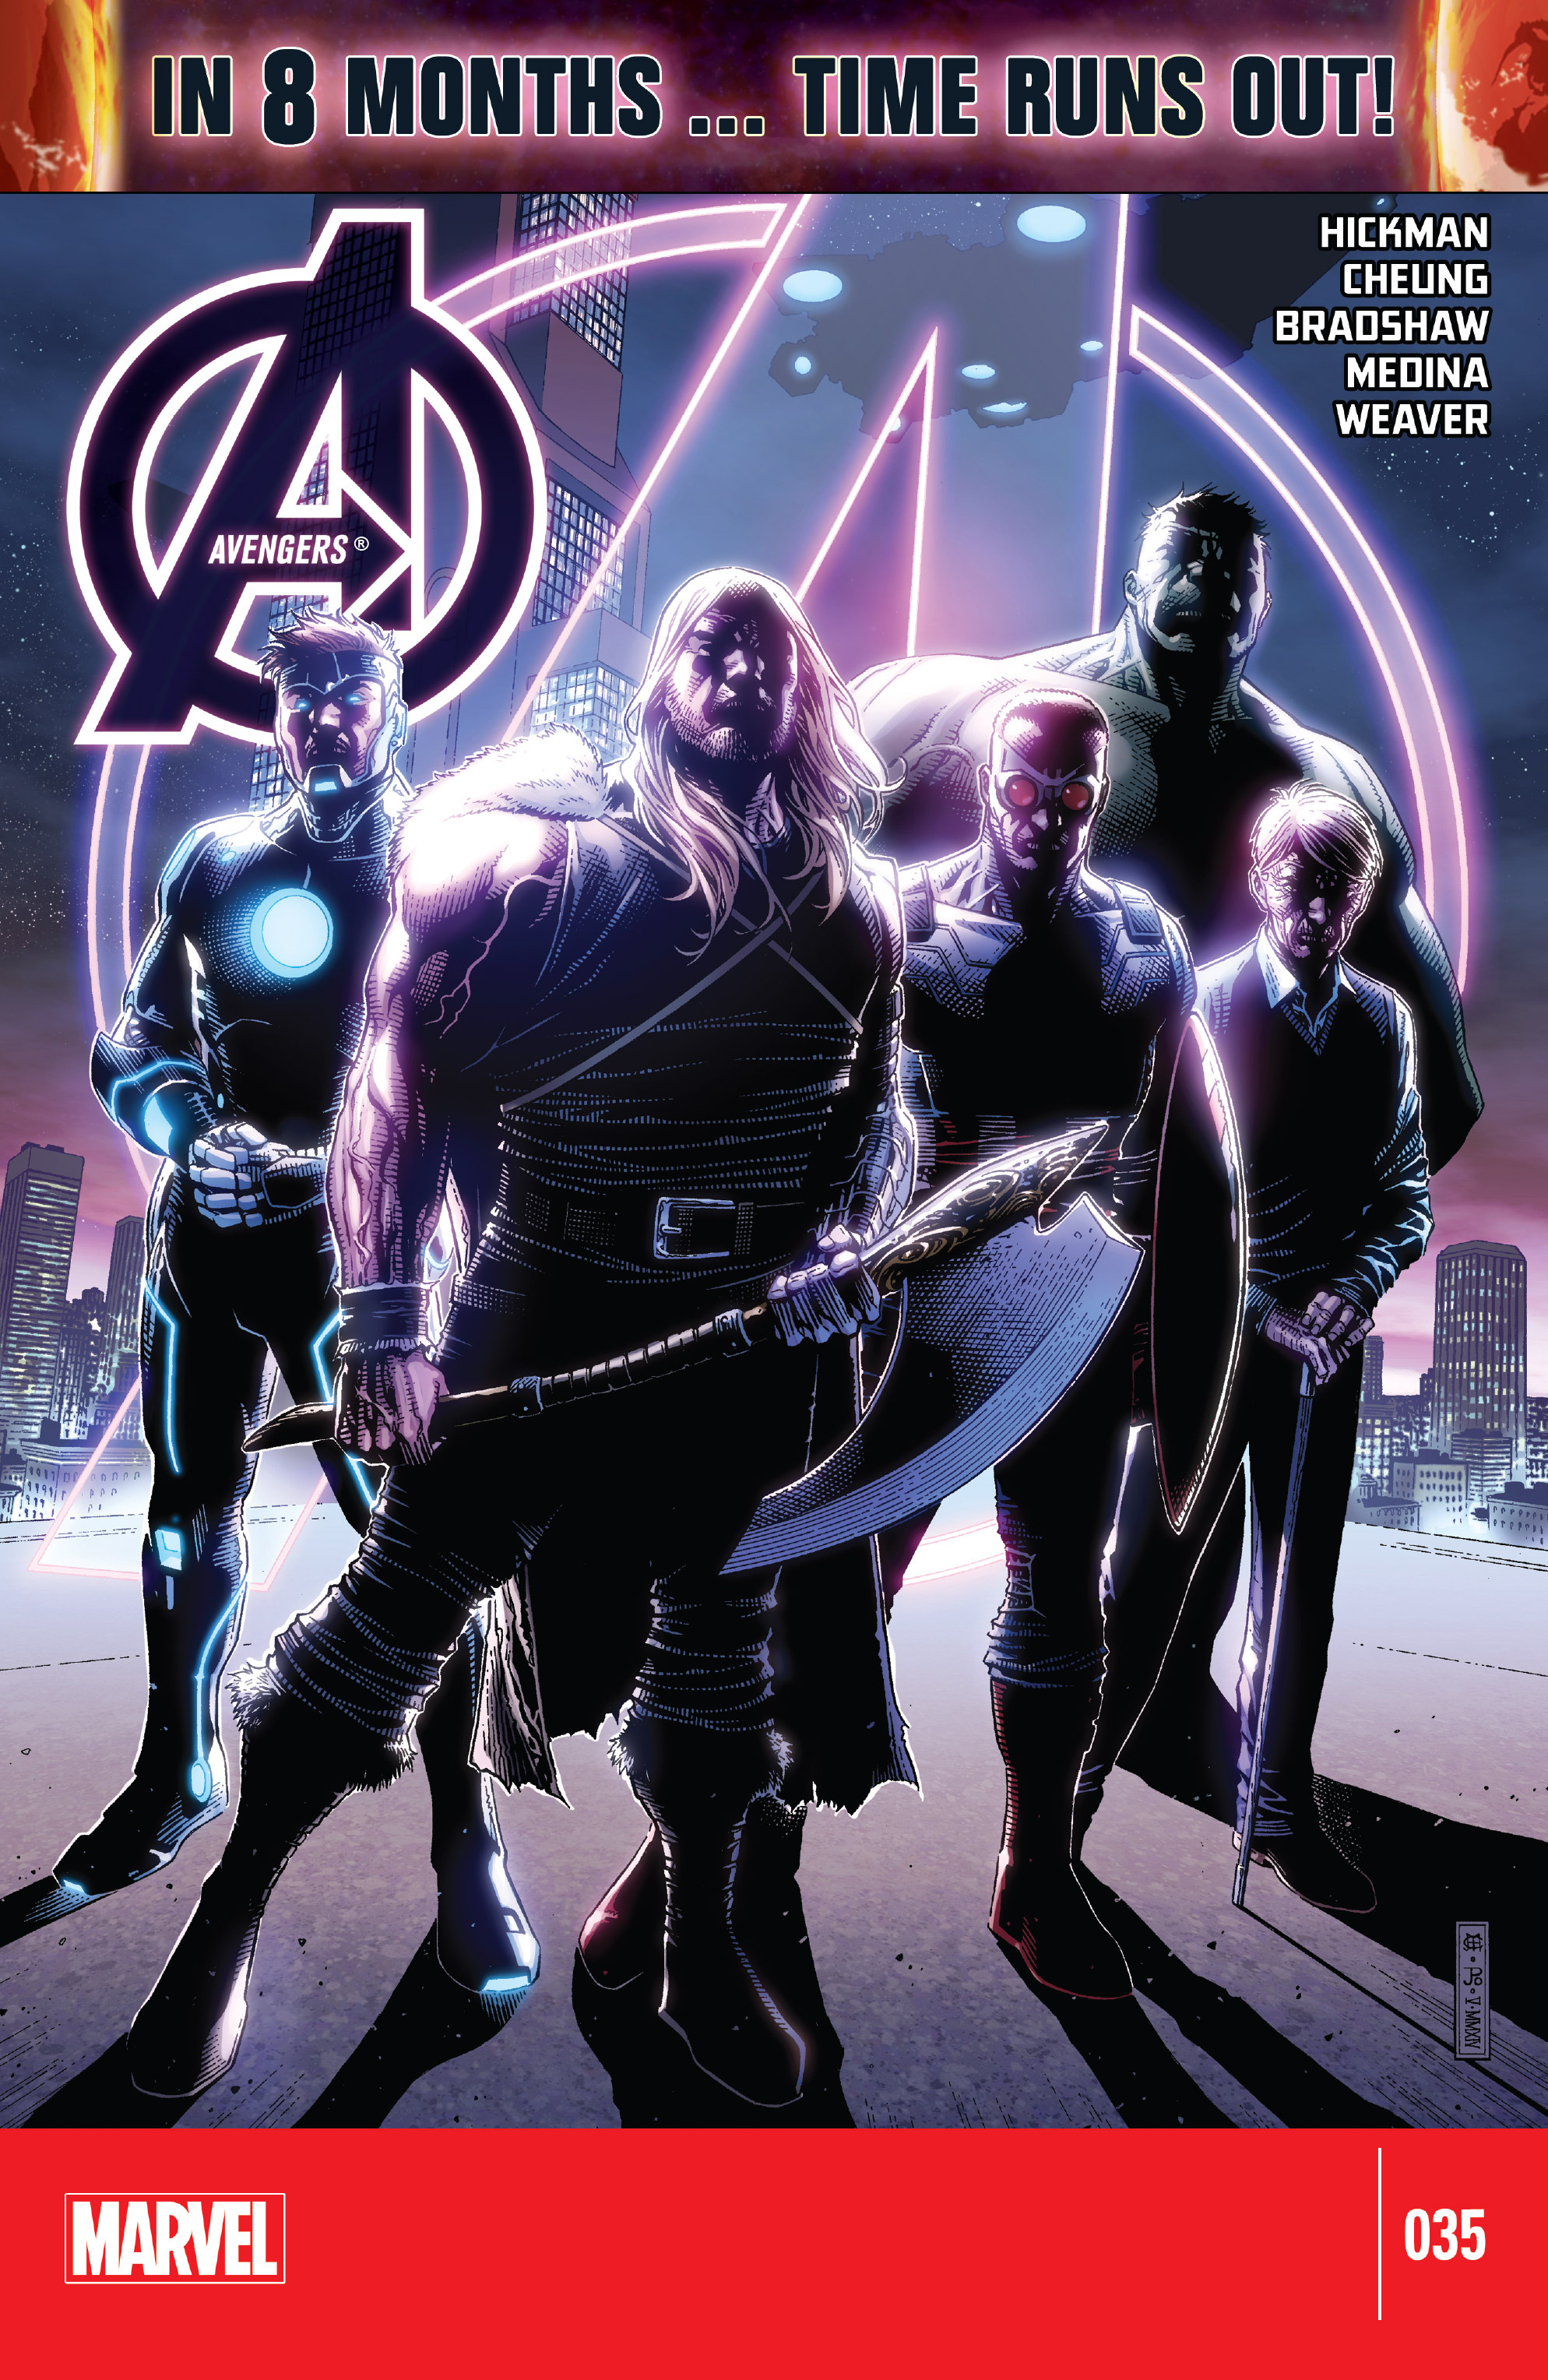 Read online Avengers: Time Runs Out comic -  Issue # TPB 1 - 3